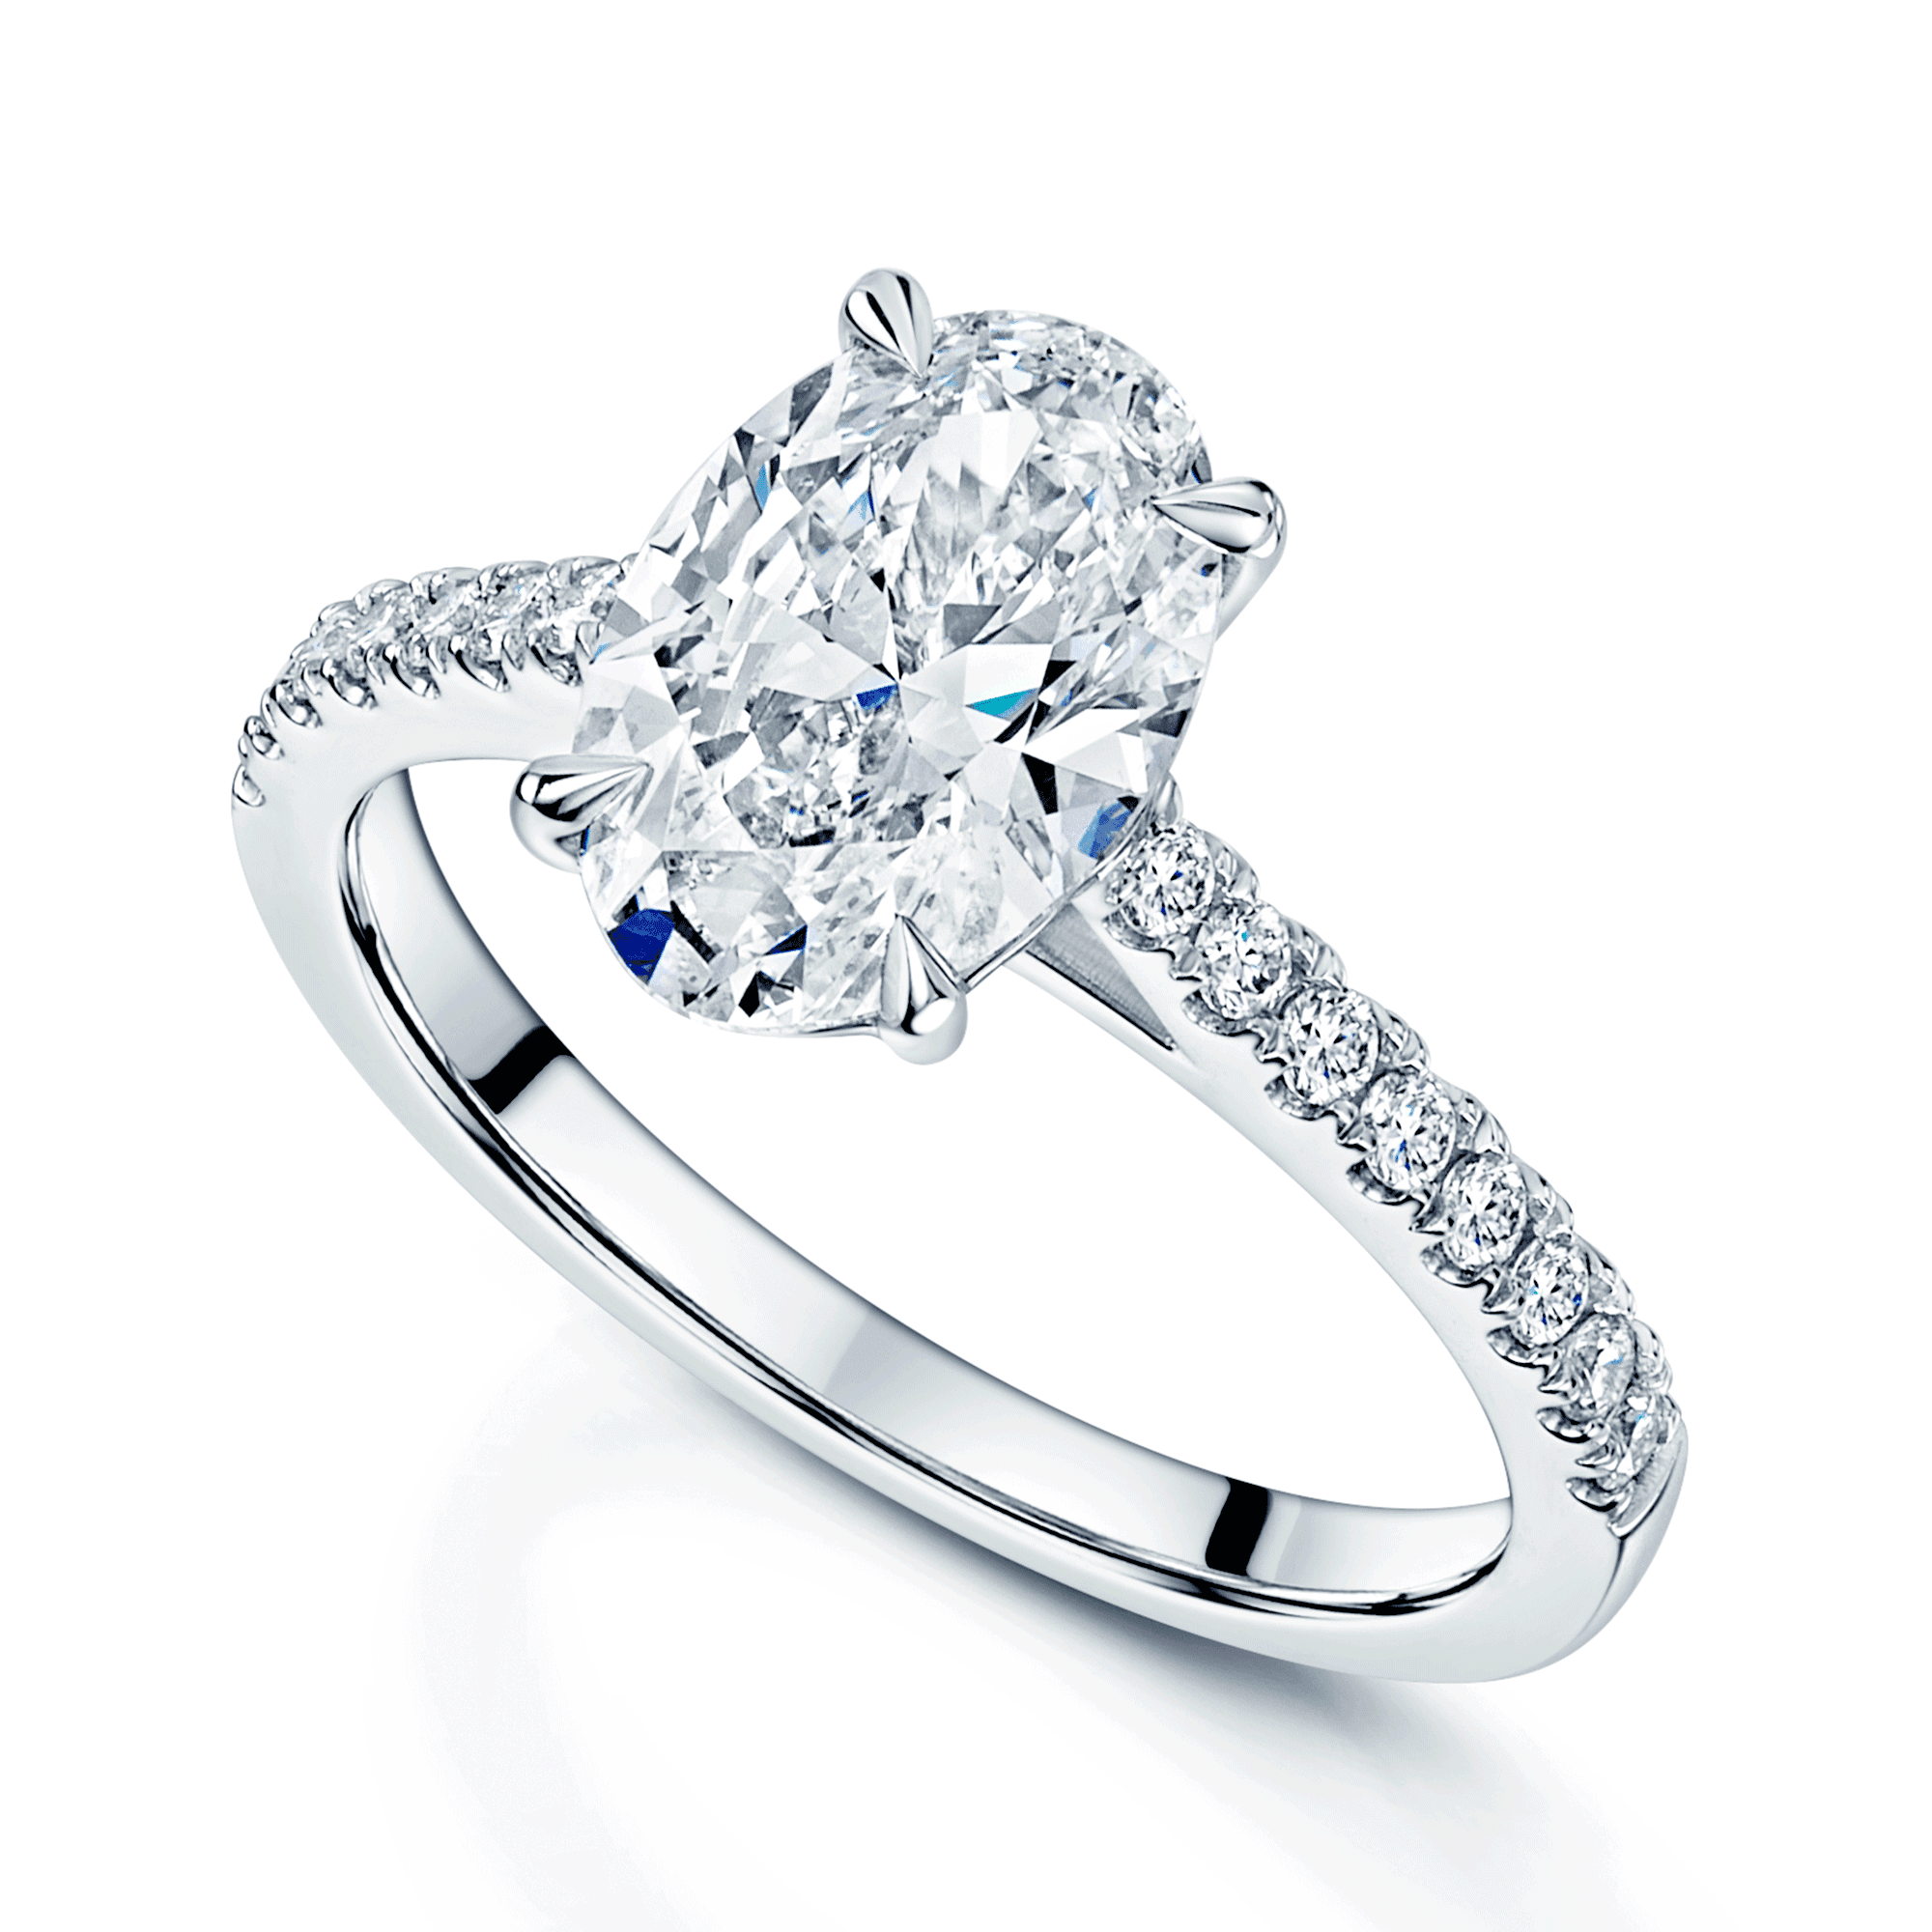 Platinum GIA Certificated 2.05 Carat Oval Cut Diamond Solitaire Ring With Diamond Shoulders